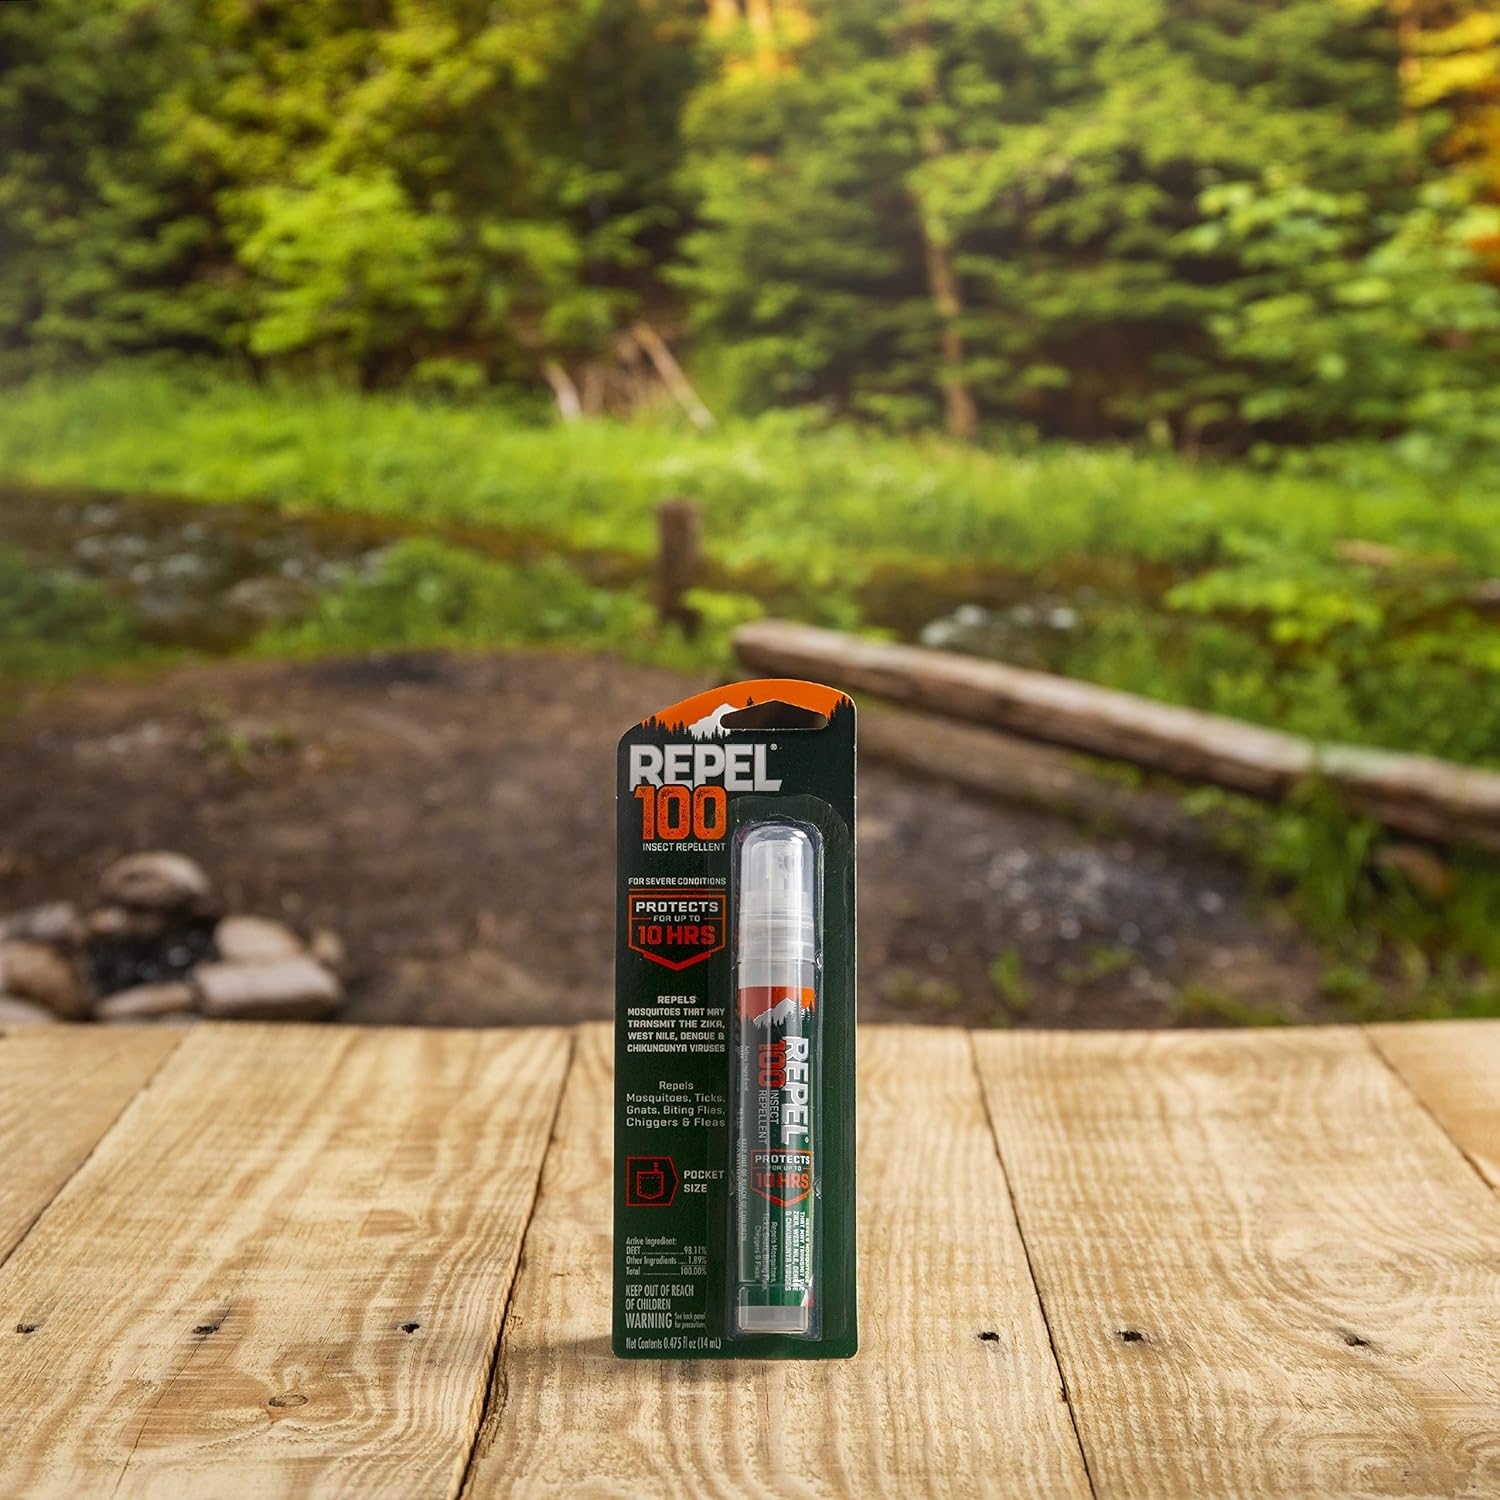 Repel 100 Insect Repellent, Pen-Size Pump Spray,  0.475-Ounce, 6-Pack 94098-1